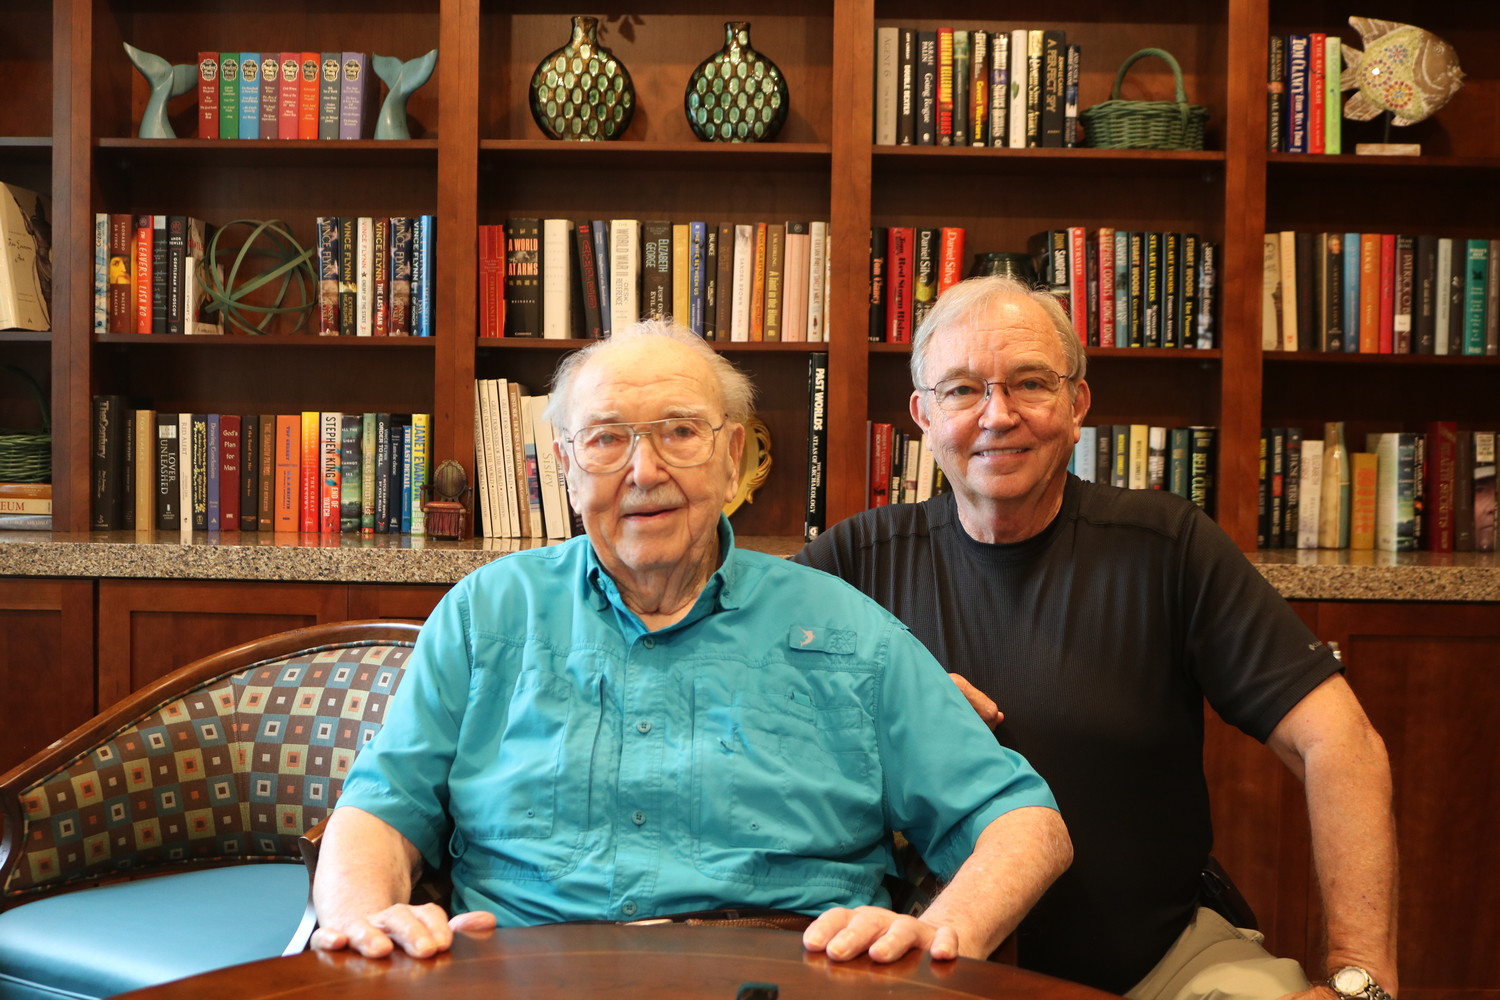 Bud Baisden (left), who is turning 100 July 20, sits next to his son Bill at the library at The Palms at Ponte Vedra.